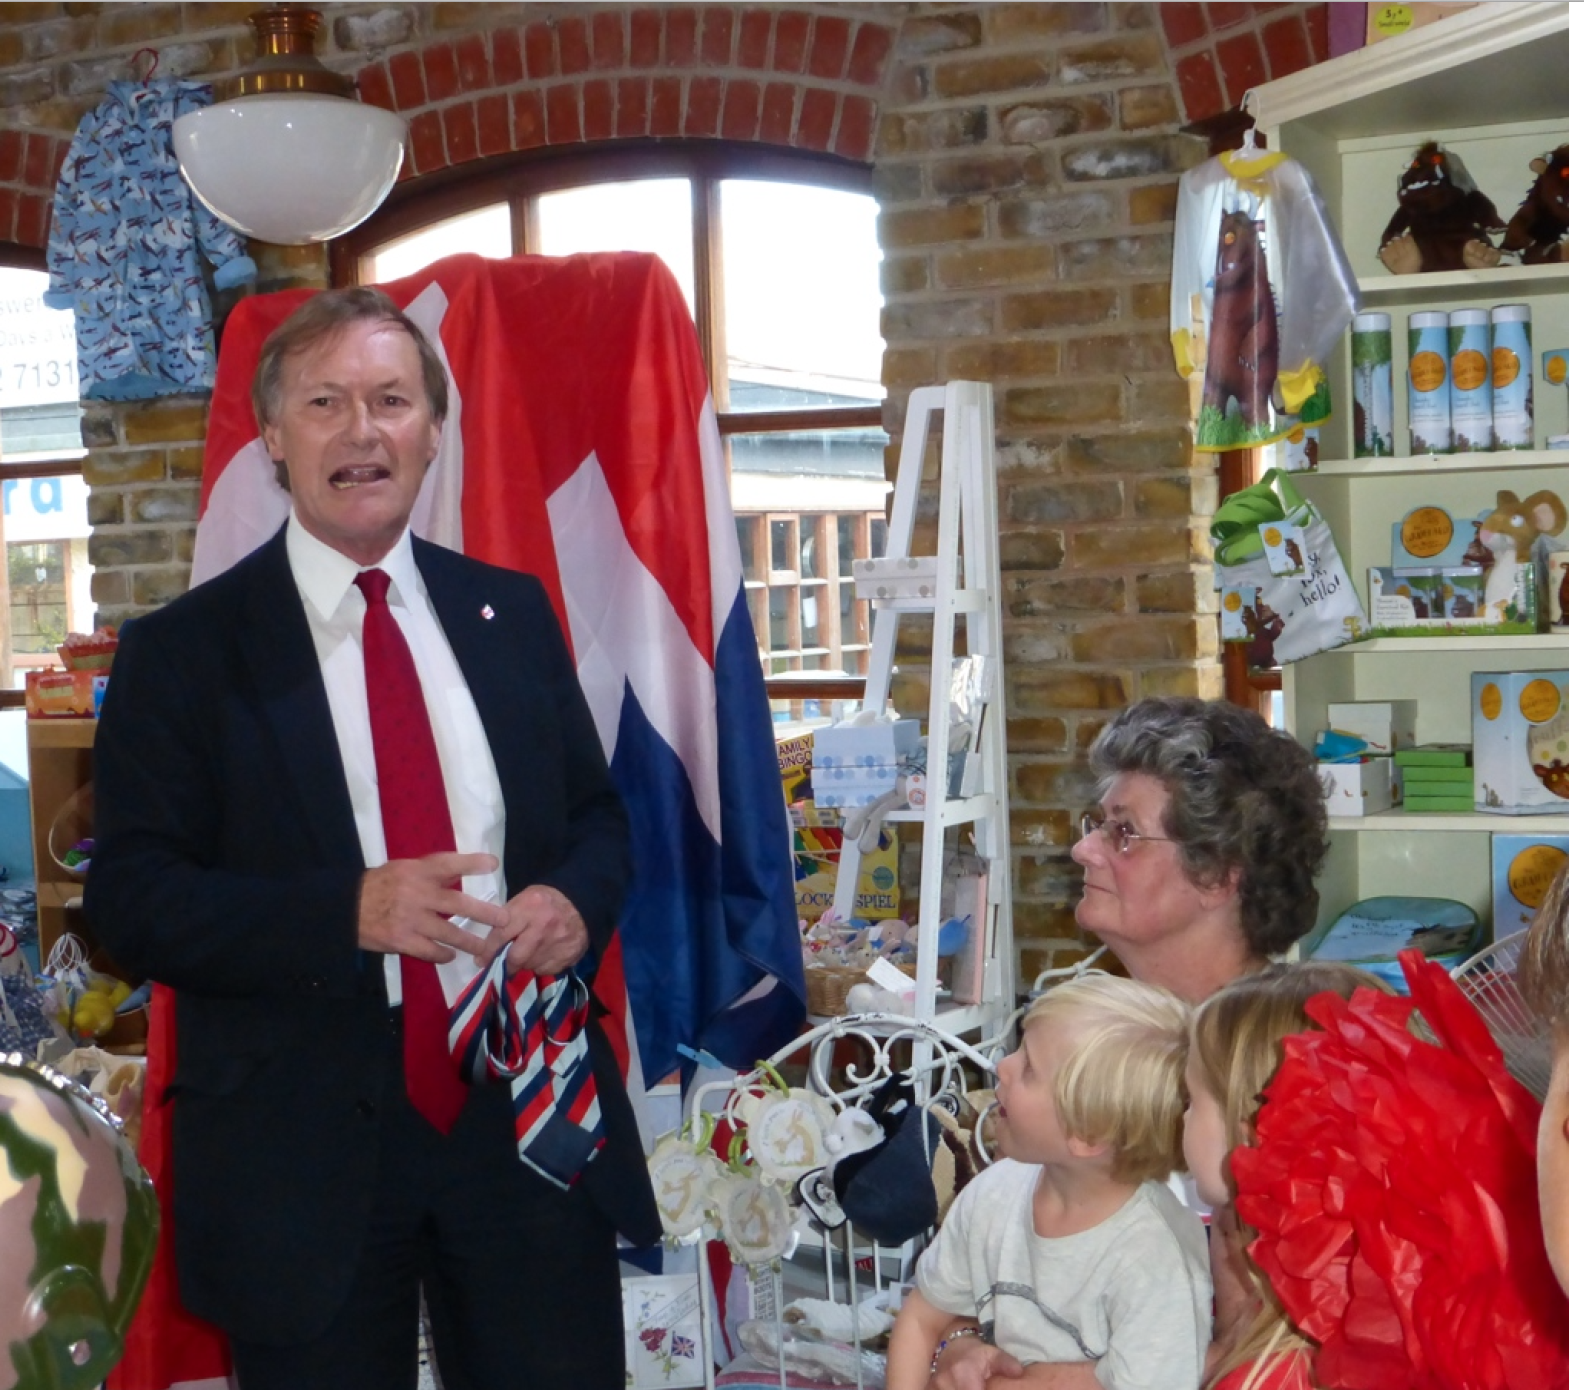 Above: Sir David Amess in full flow, delivering a speech at The Lynn Tait Gallery.